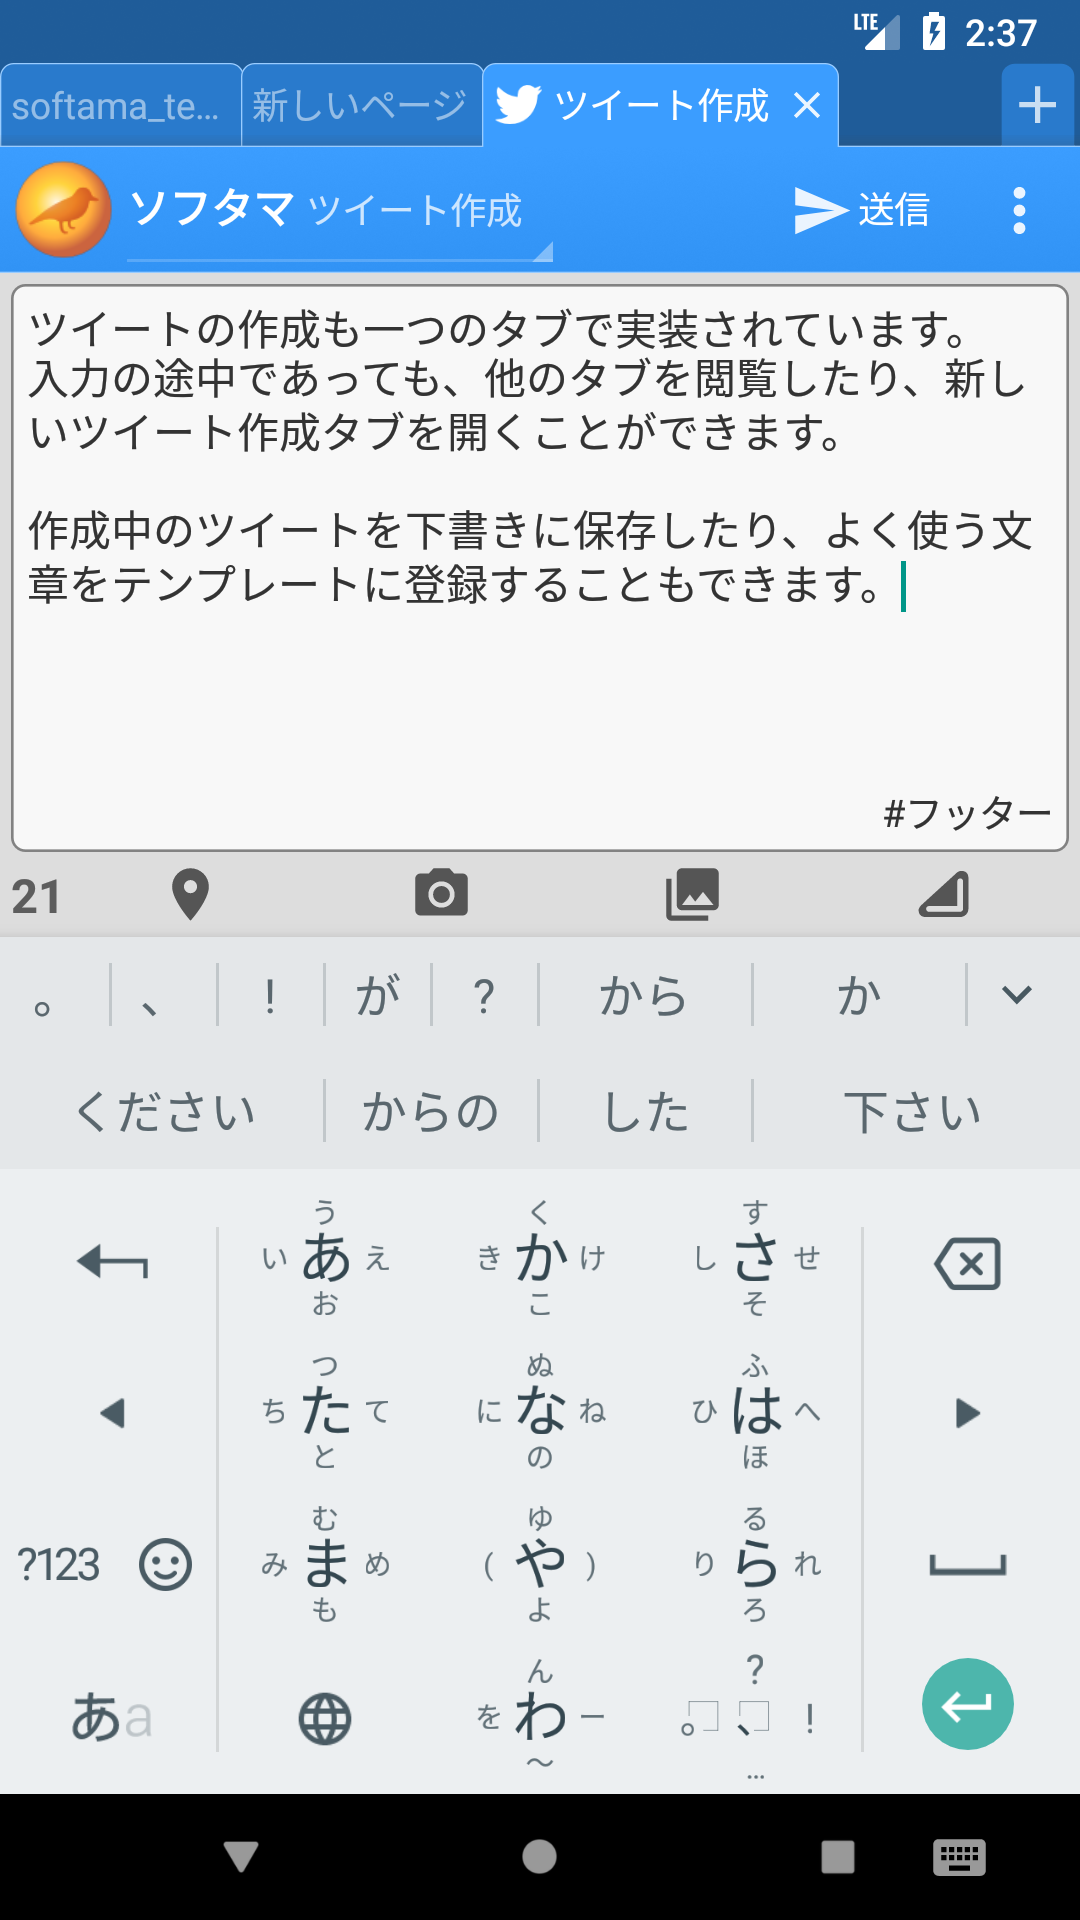 Android application ツイタマ+ screenshort